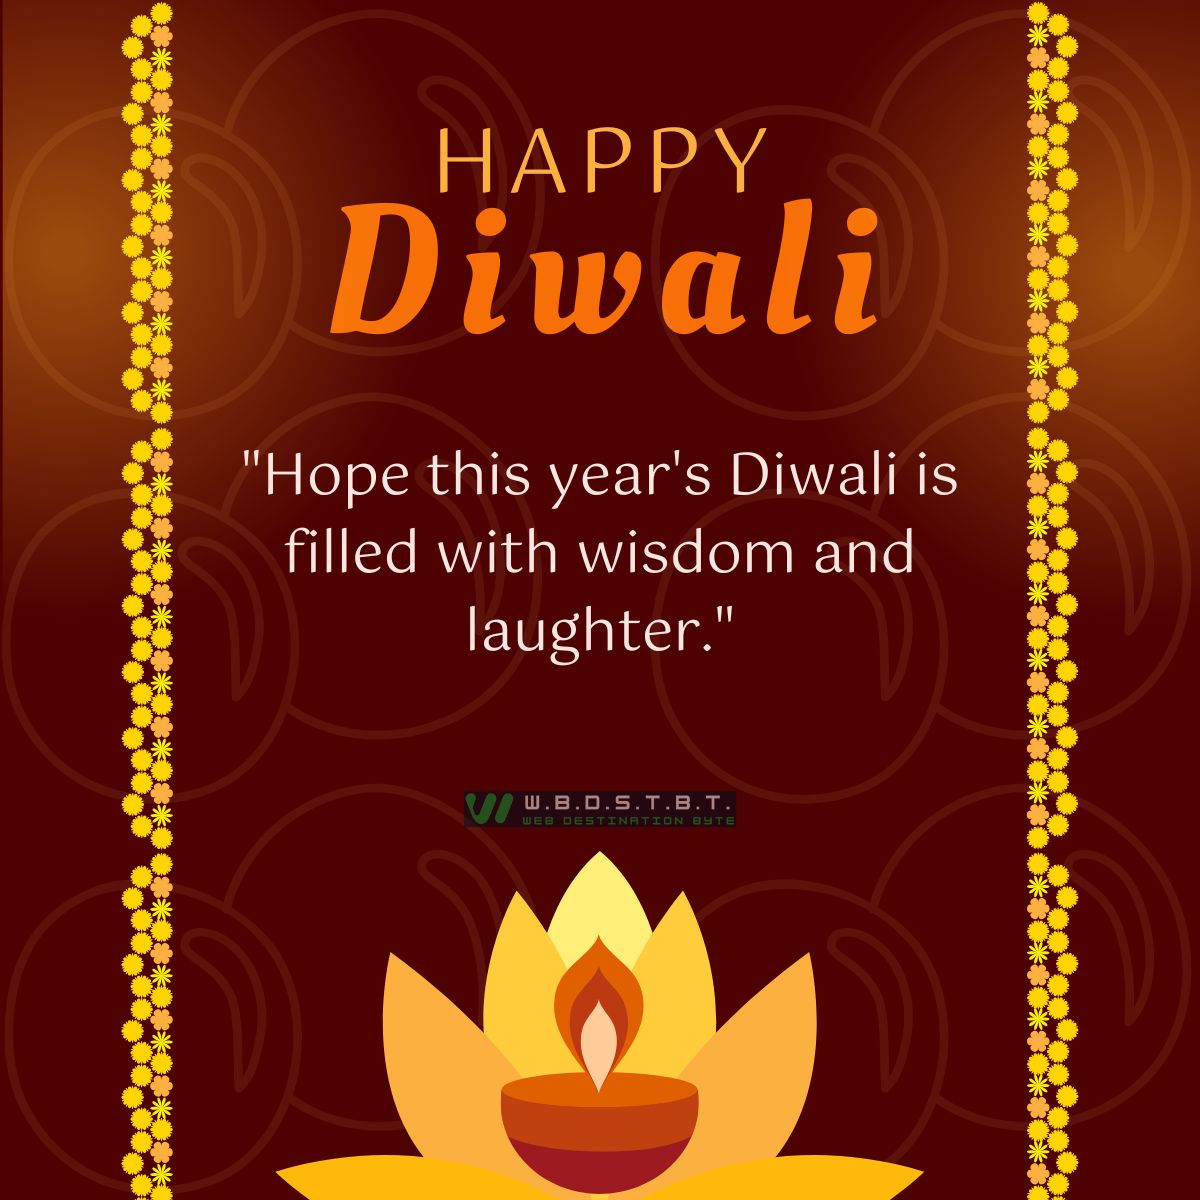 "Hope this year's Diwali is filled with wisdom and laughter."